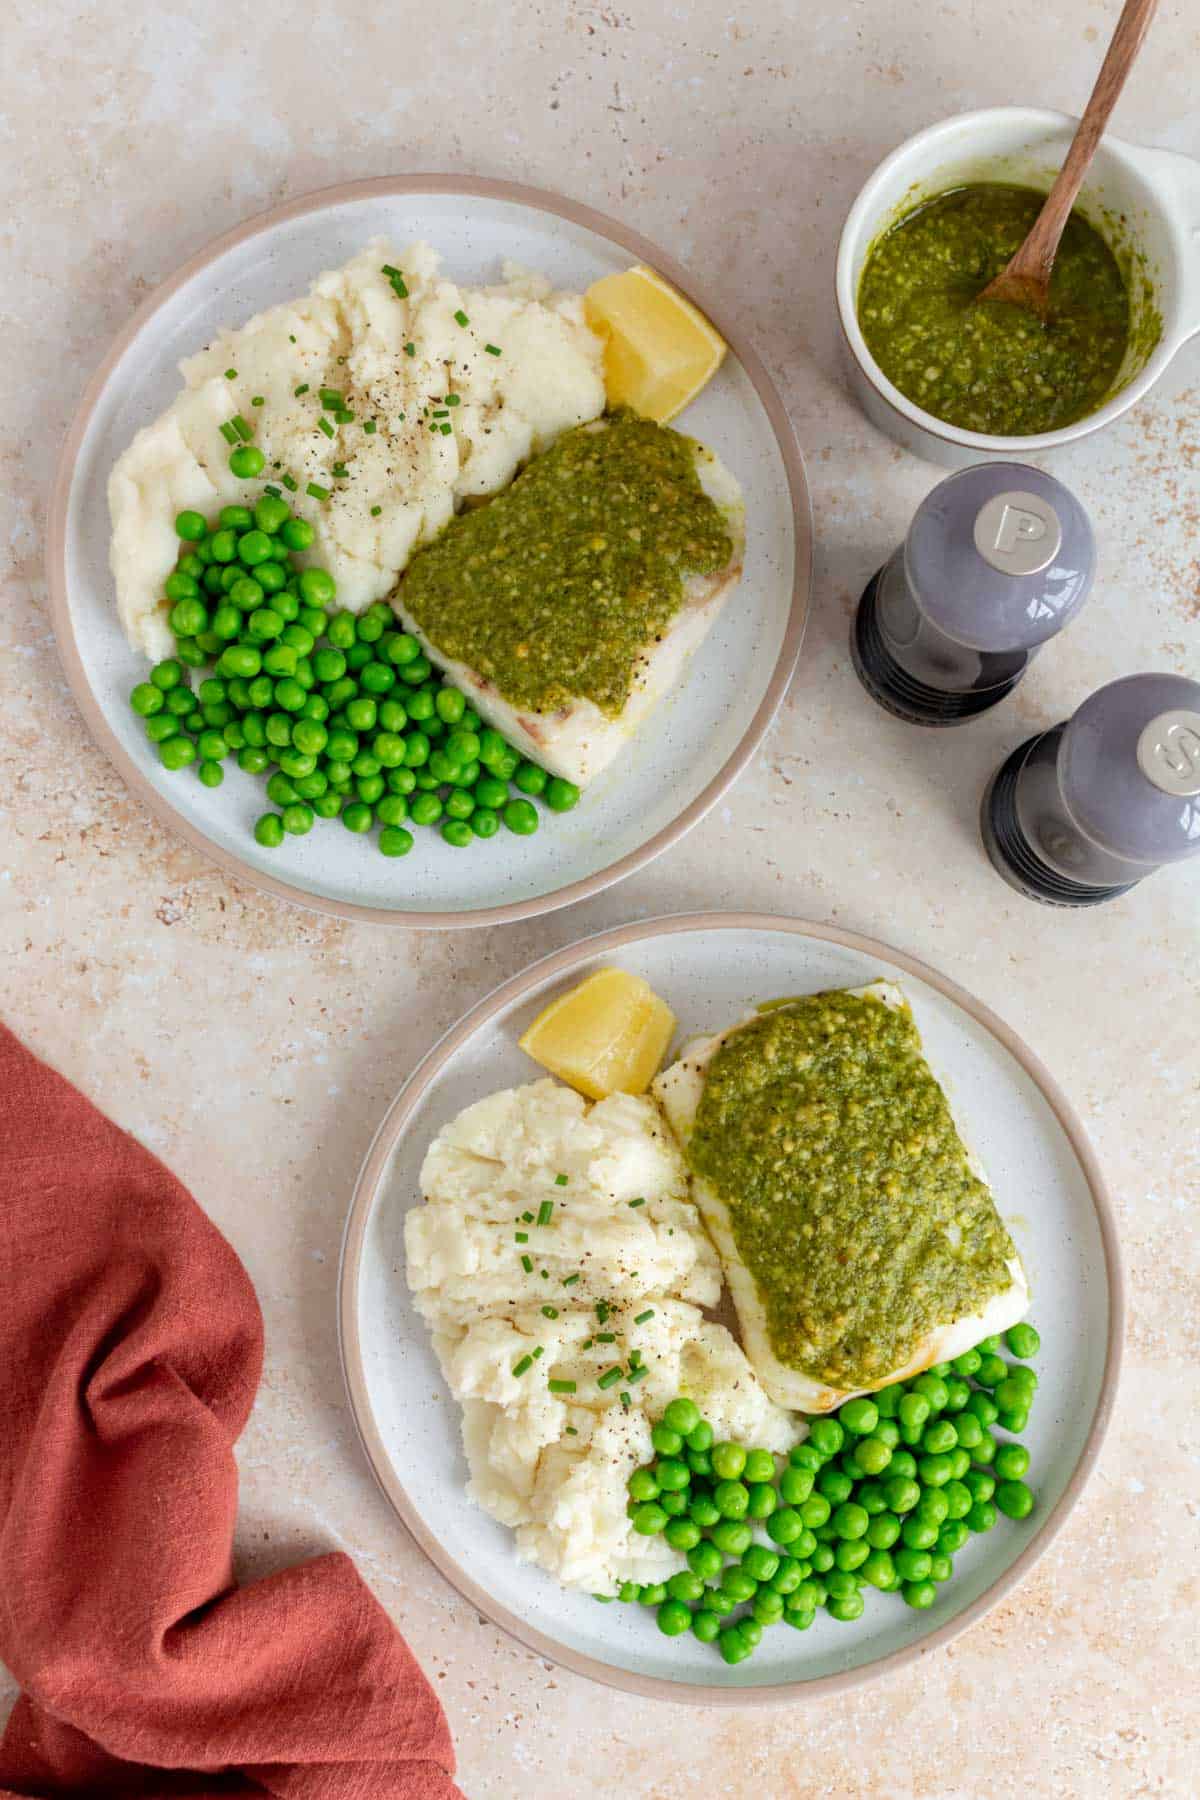 Two plates of pesto cod with mashed potatoes, peas, and lemon wedges. A bowl of pesto and salt and pepper grinder off to the side.